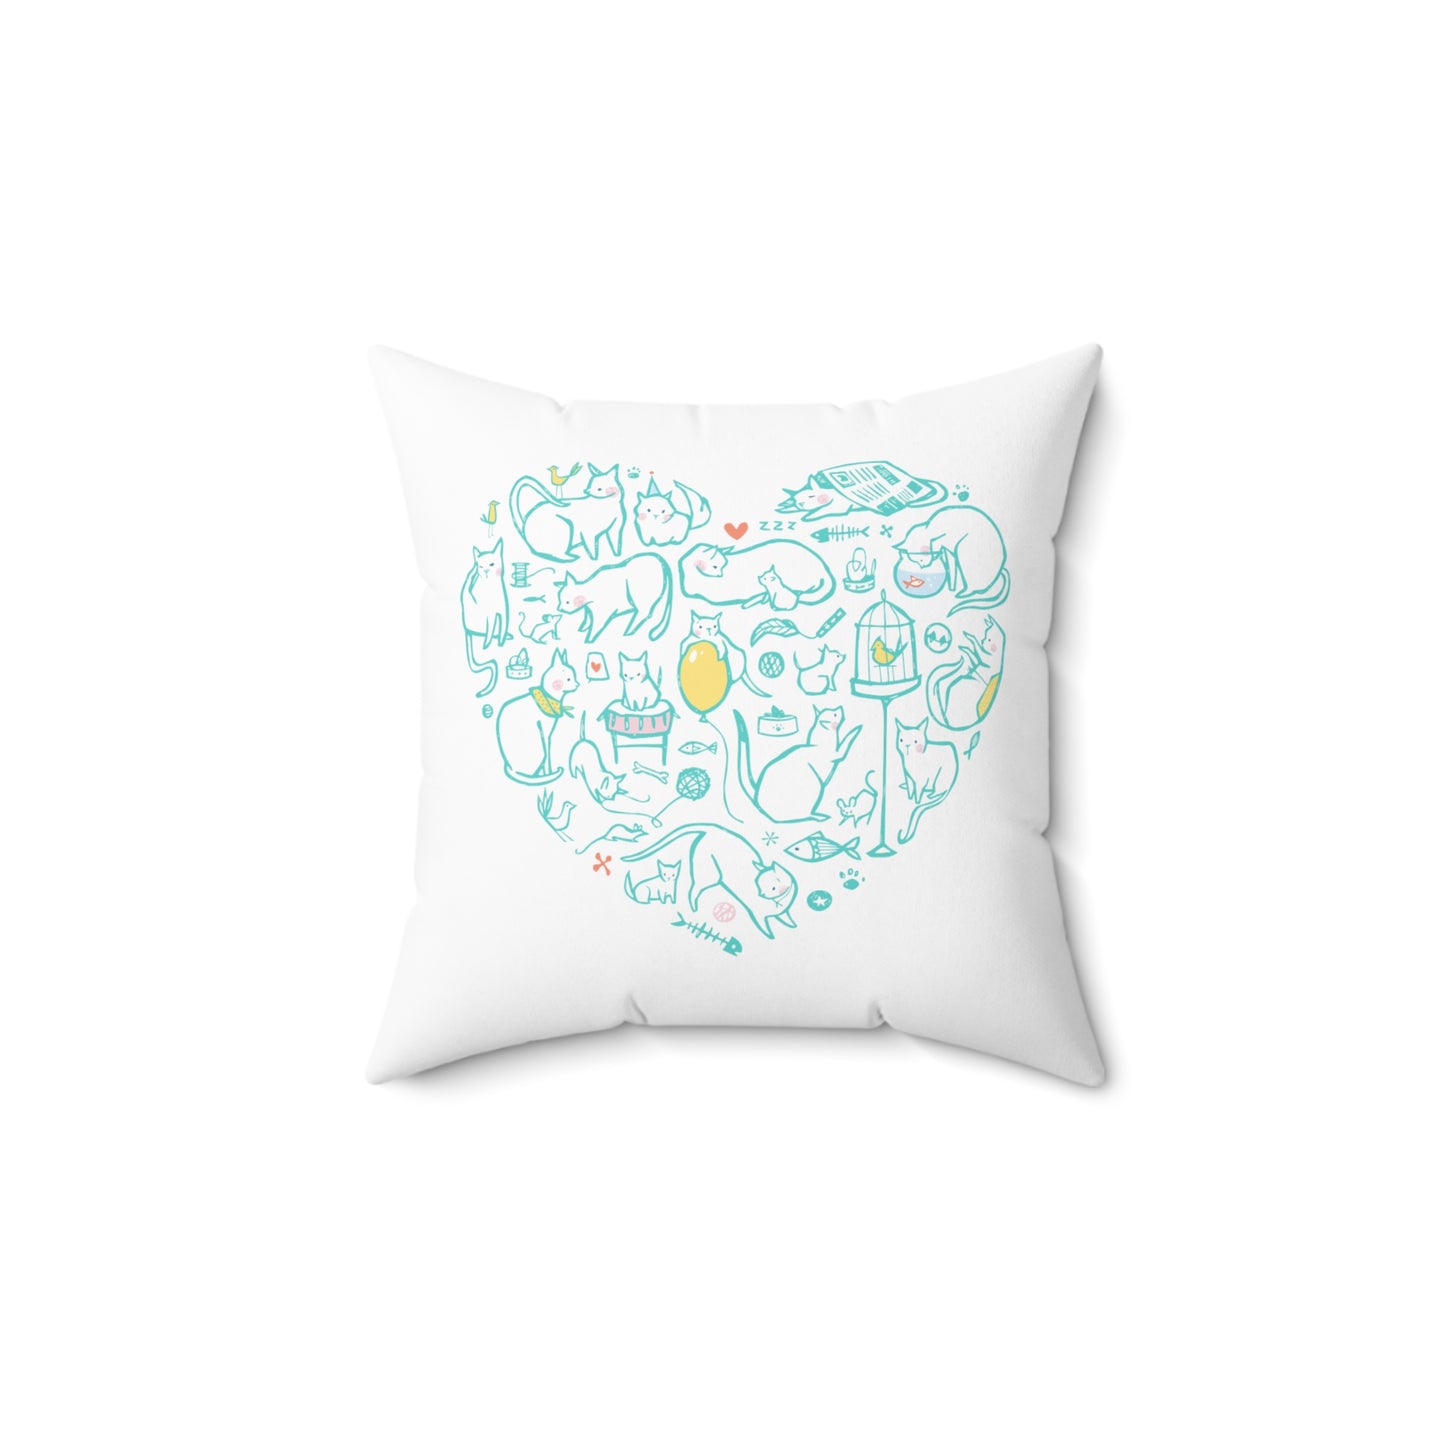 Colorful Cat Heart Spun Polyester Square Pillow